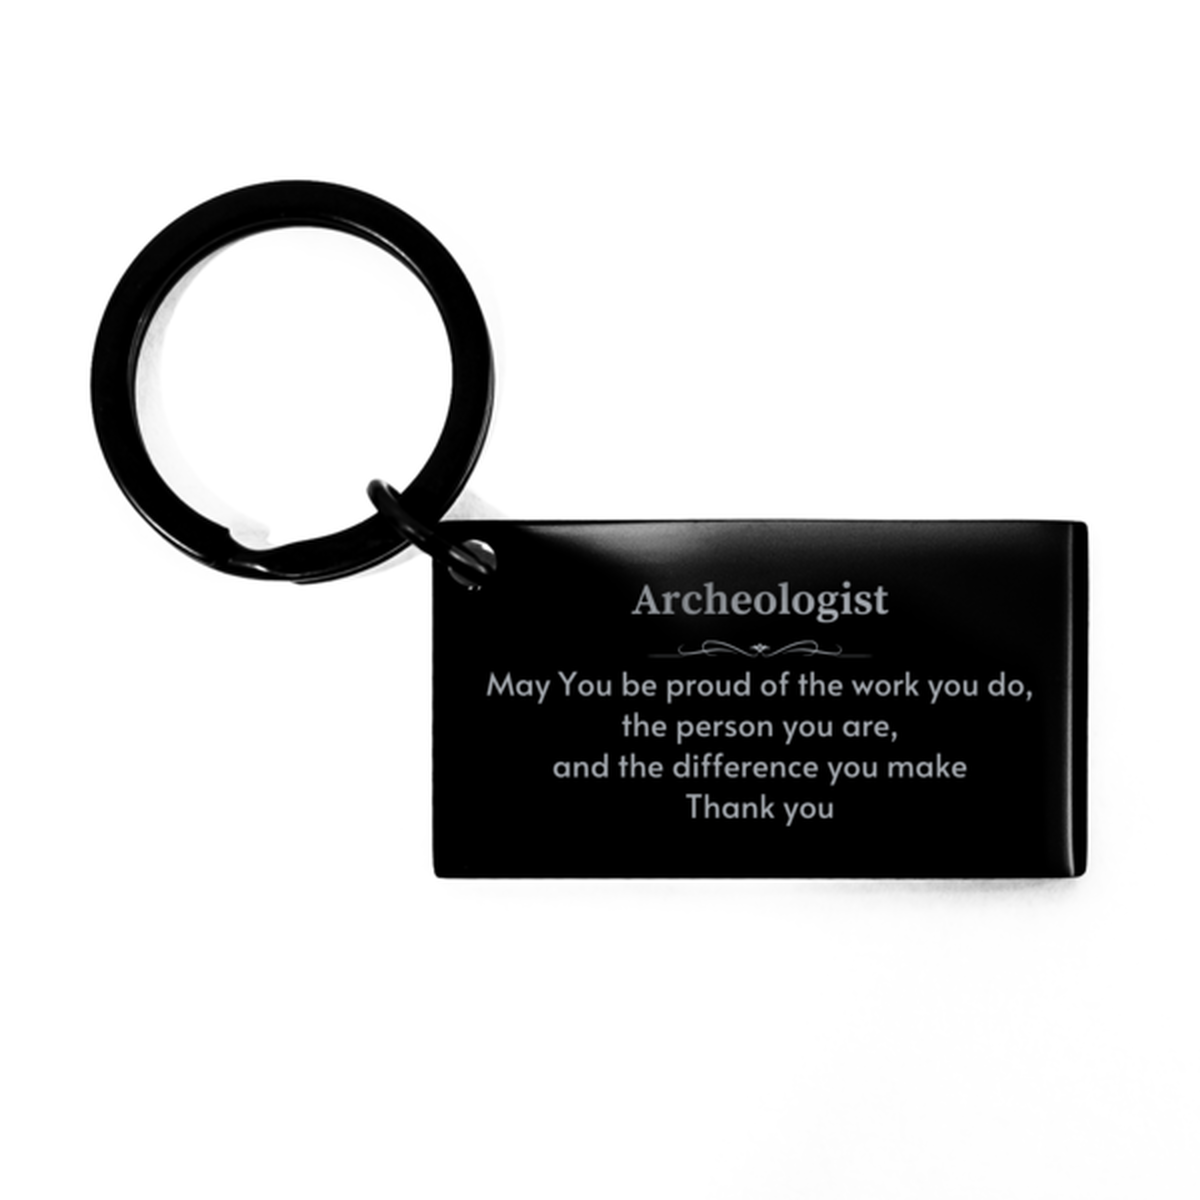 Heartwarming Keychain Retirement Coworkers Gifts for Archeologist, Coach May You be proud of the work you do, the person you are Gifts for Boss Men Women Friends